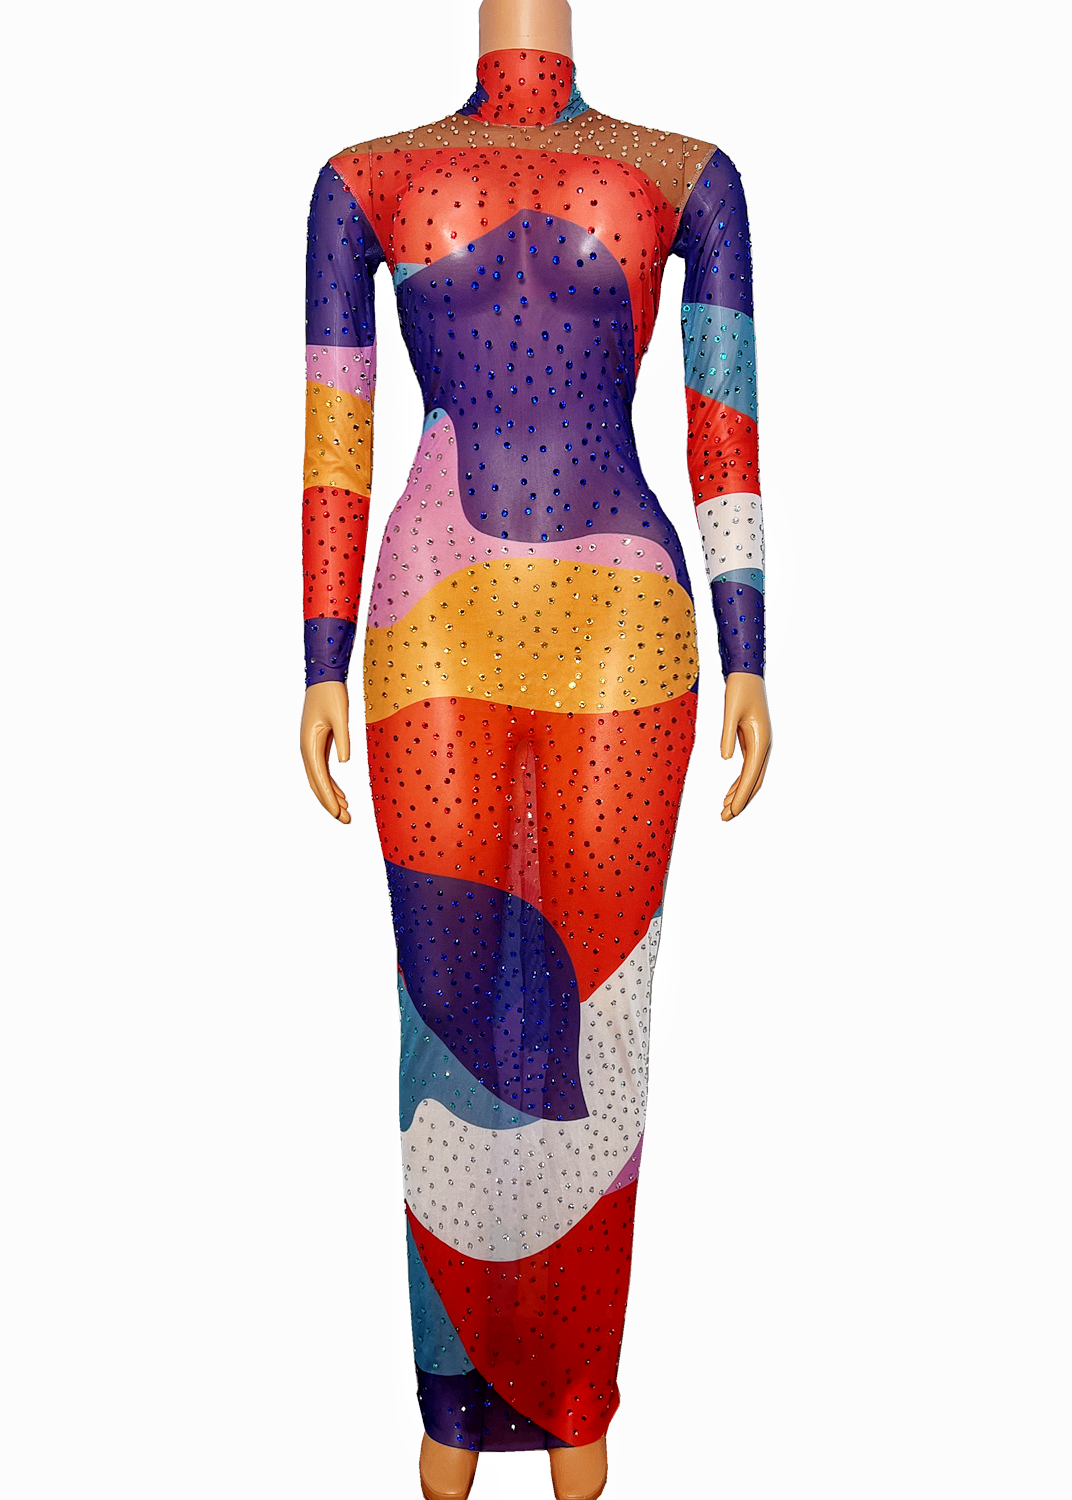 Multi-color Splice Colorful Rhinestones Stretch Long Sleeves Dress Transparent Costume Birthday Prom Celebrate Evening Outfit